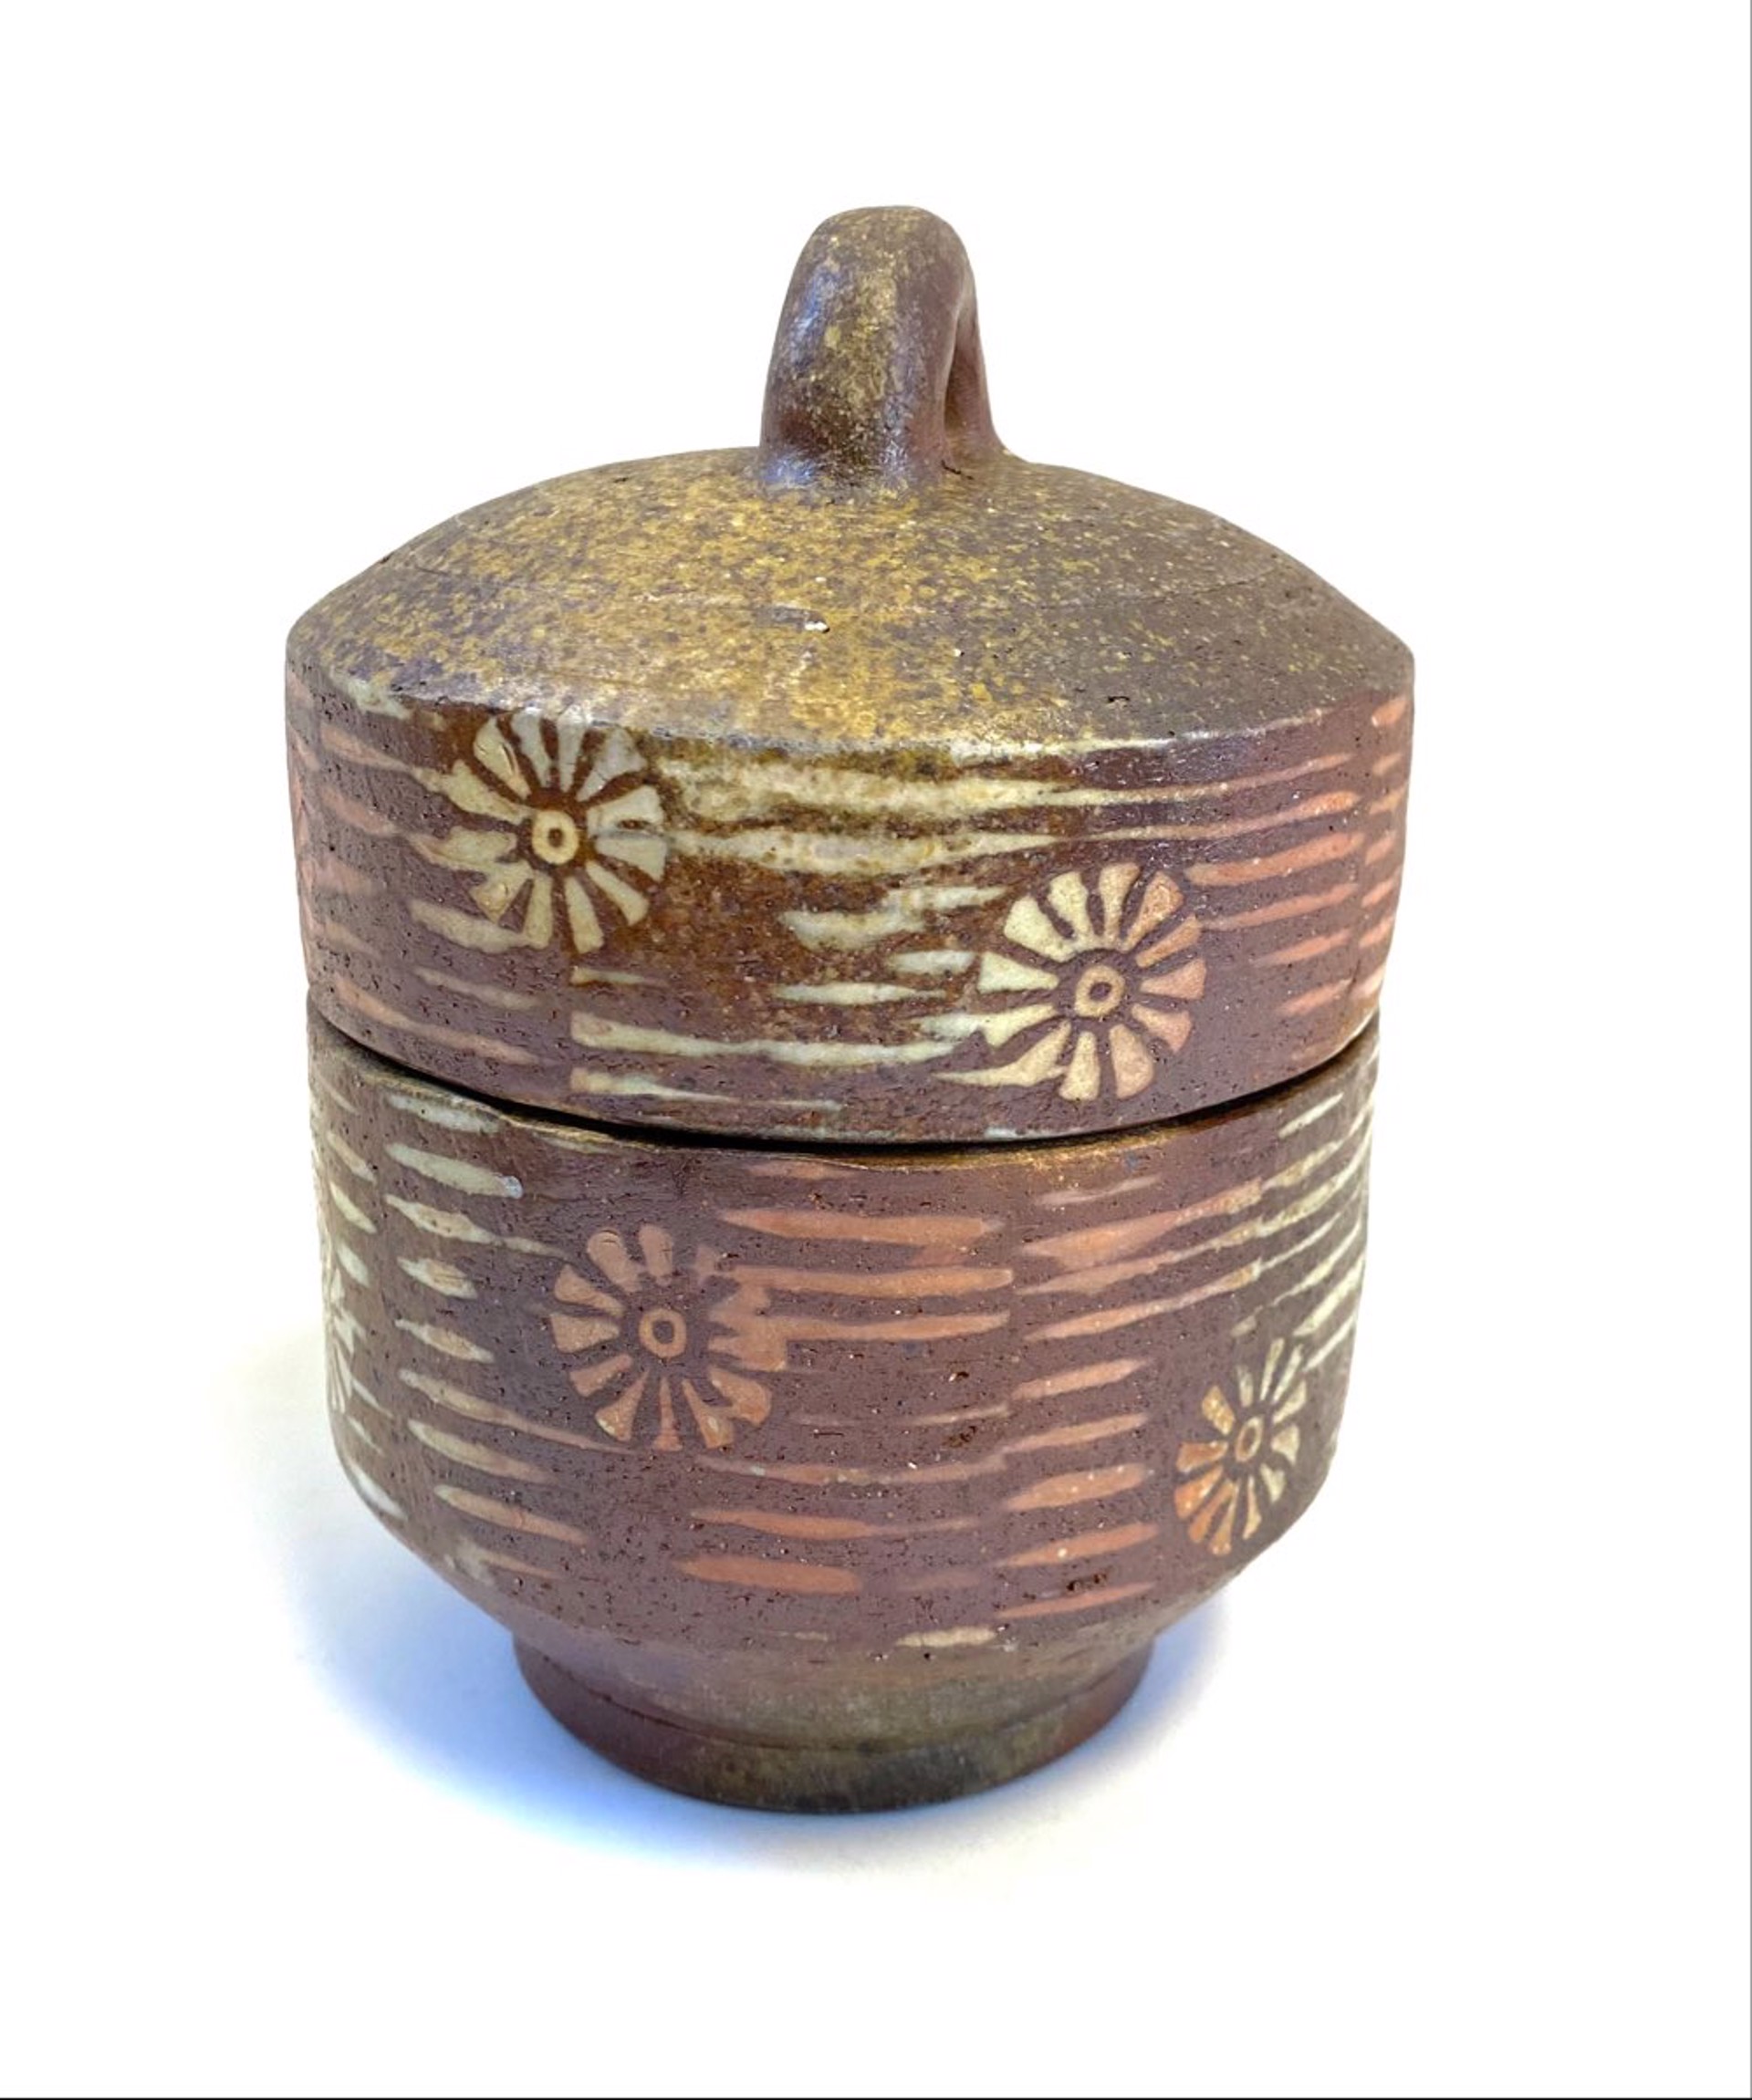 Wood-Fired Wild Stoneware Lidded Jar with Mishima Decoration by Mitch Yung